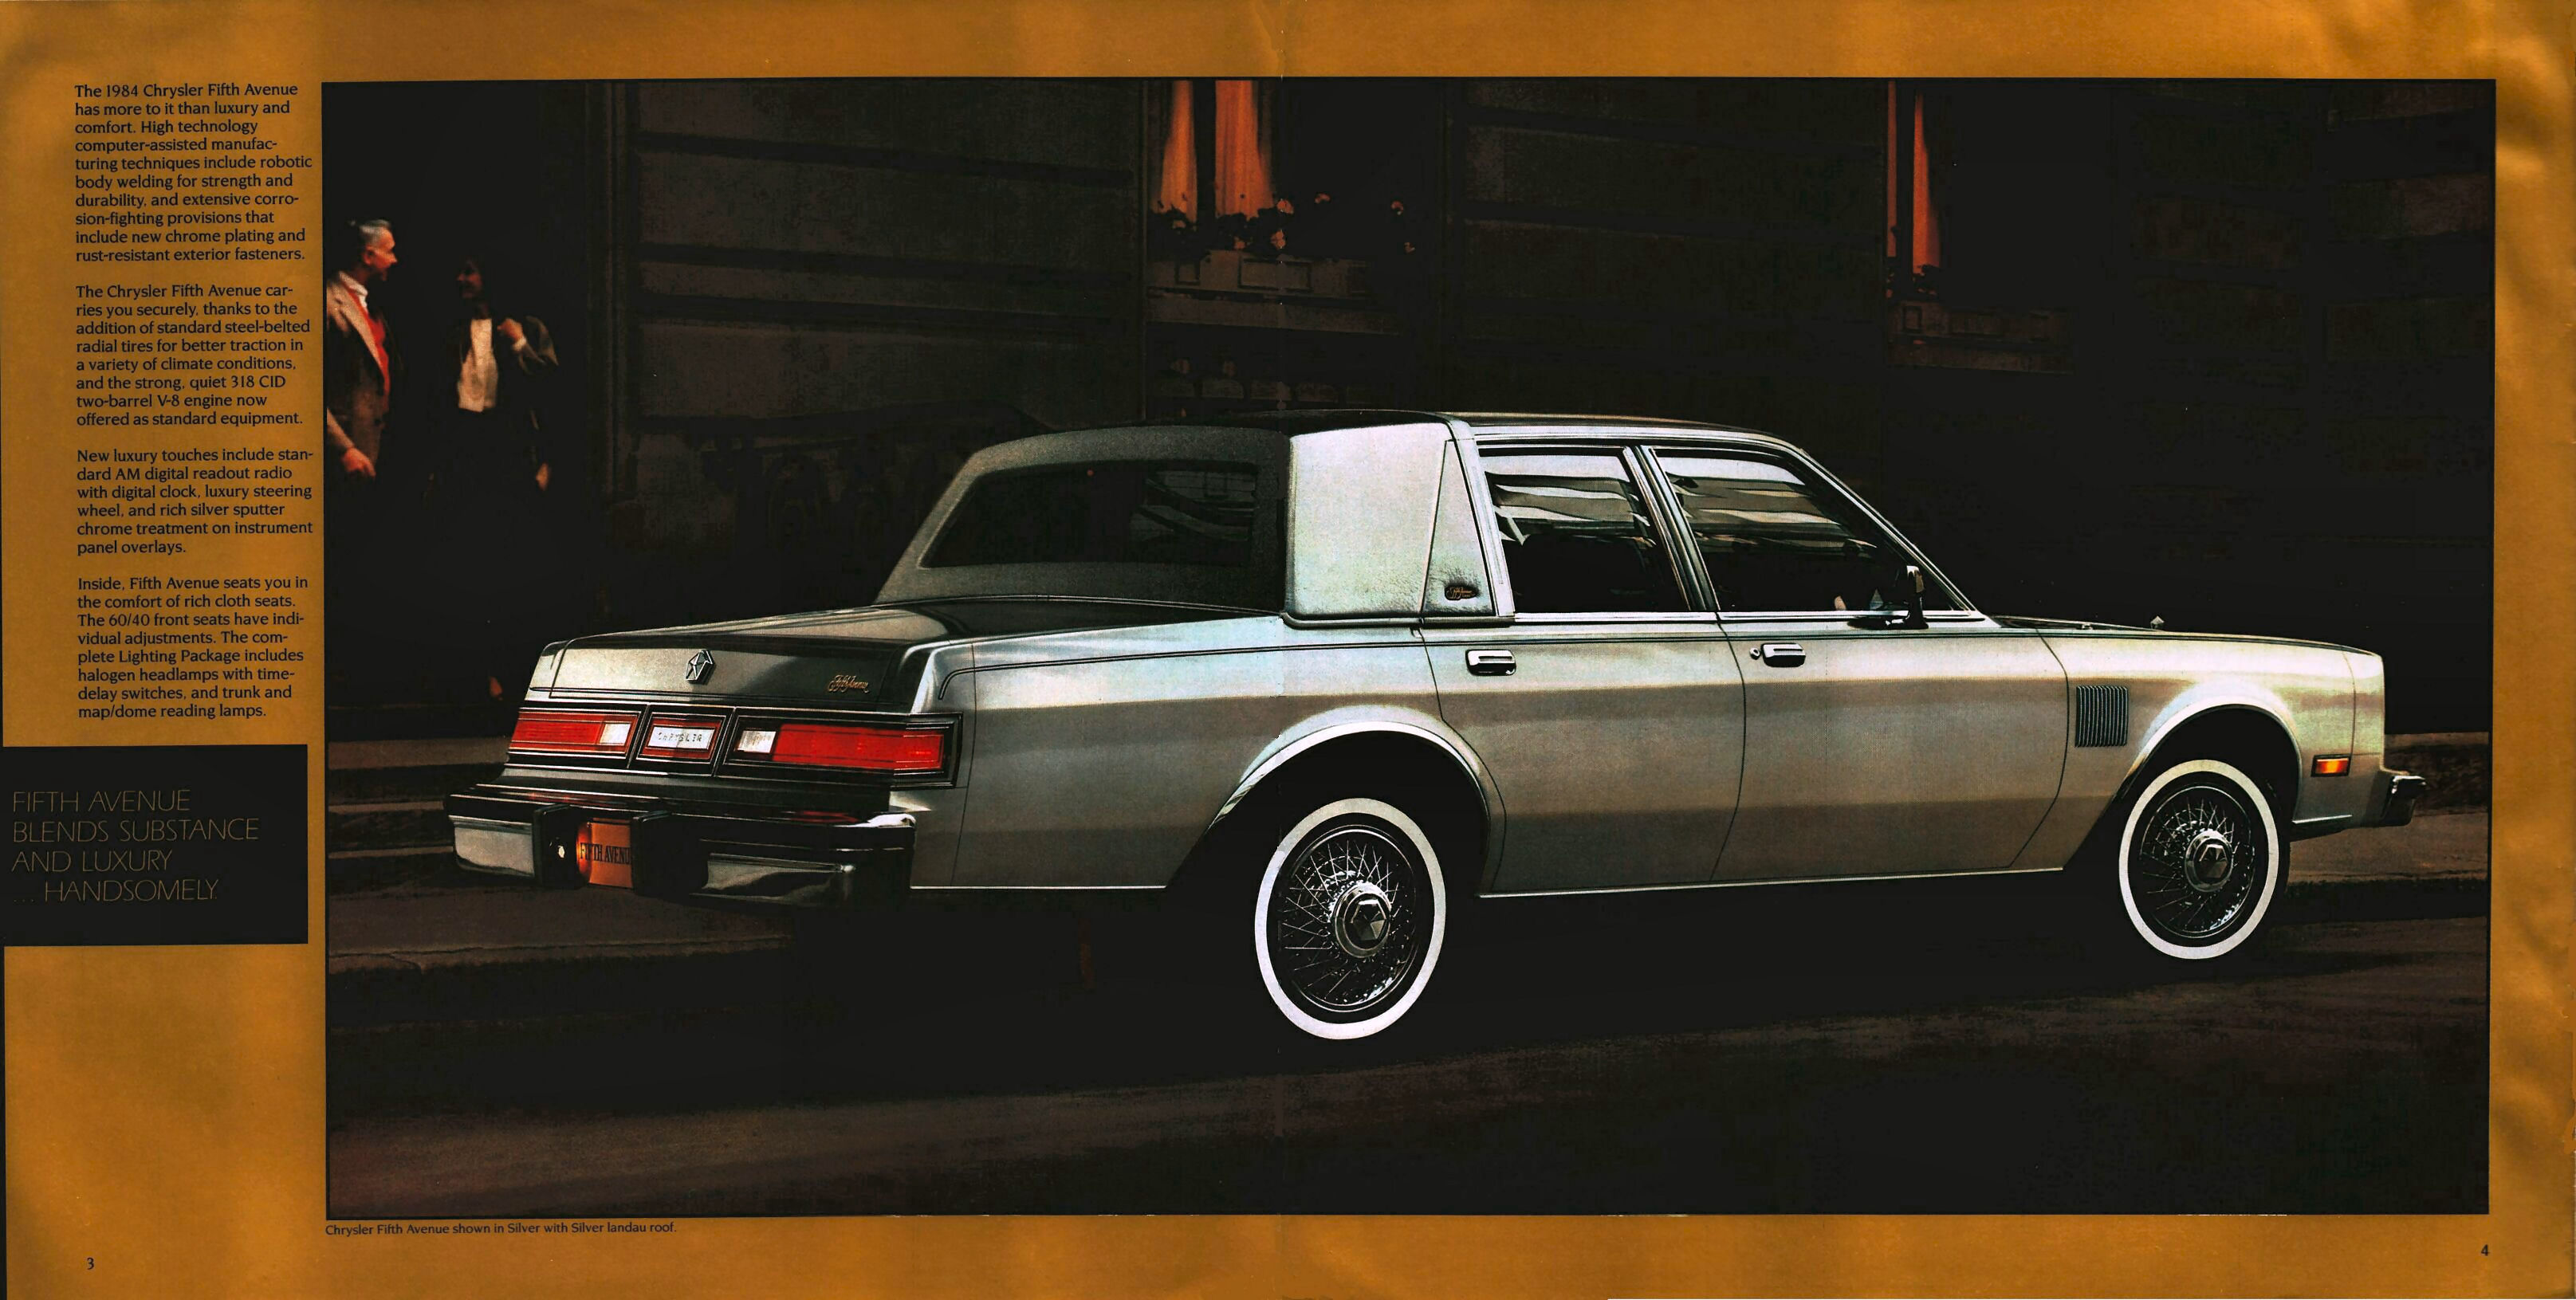 1984 Chrysler New Yorker 5th Avenue Brochure Page 1